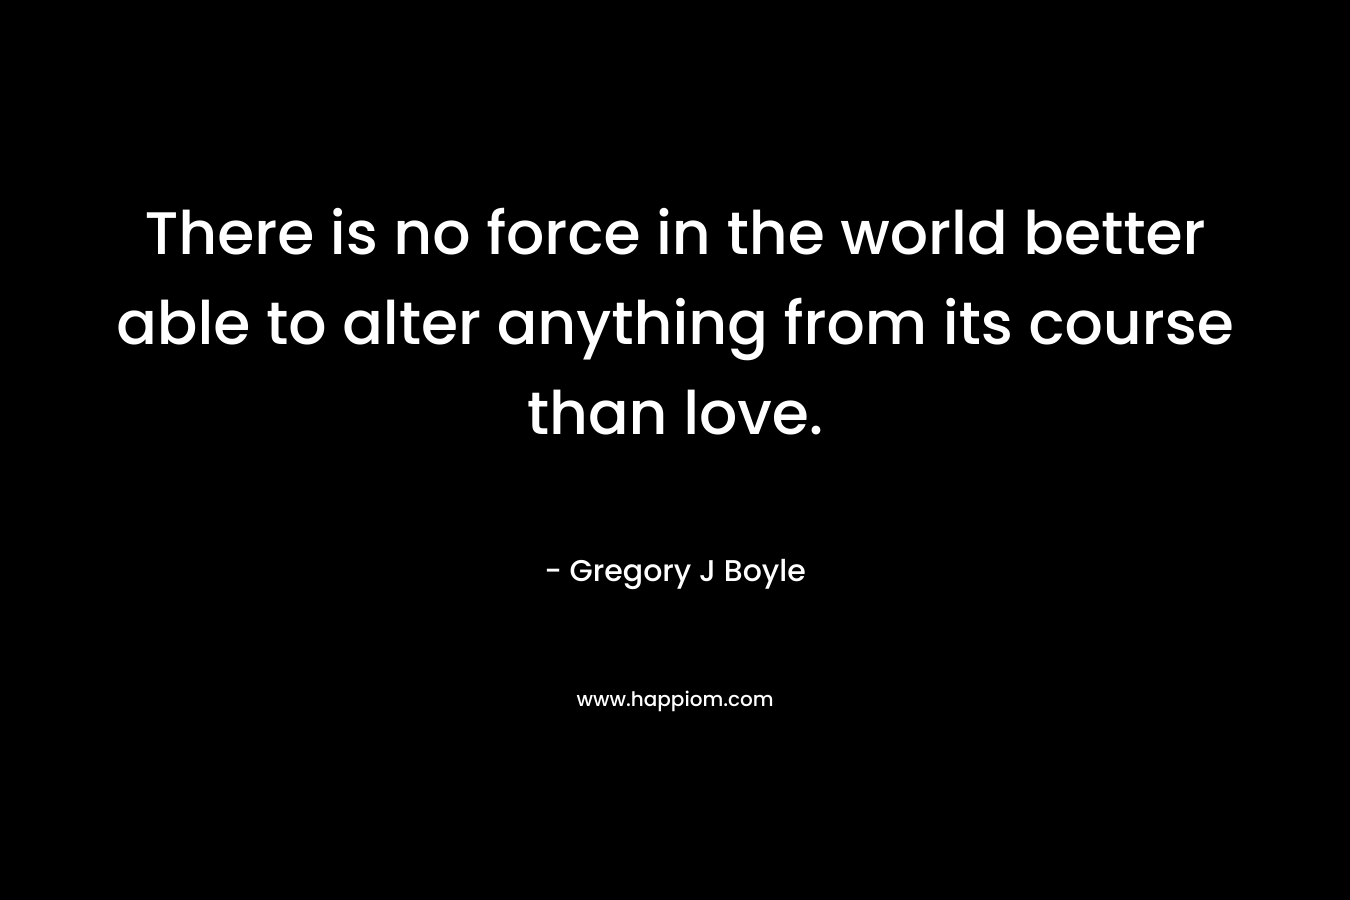 There is no force in the world better able to alter anything from its course than love. – Gregory J Boyle